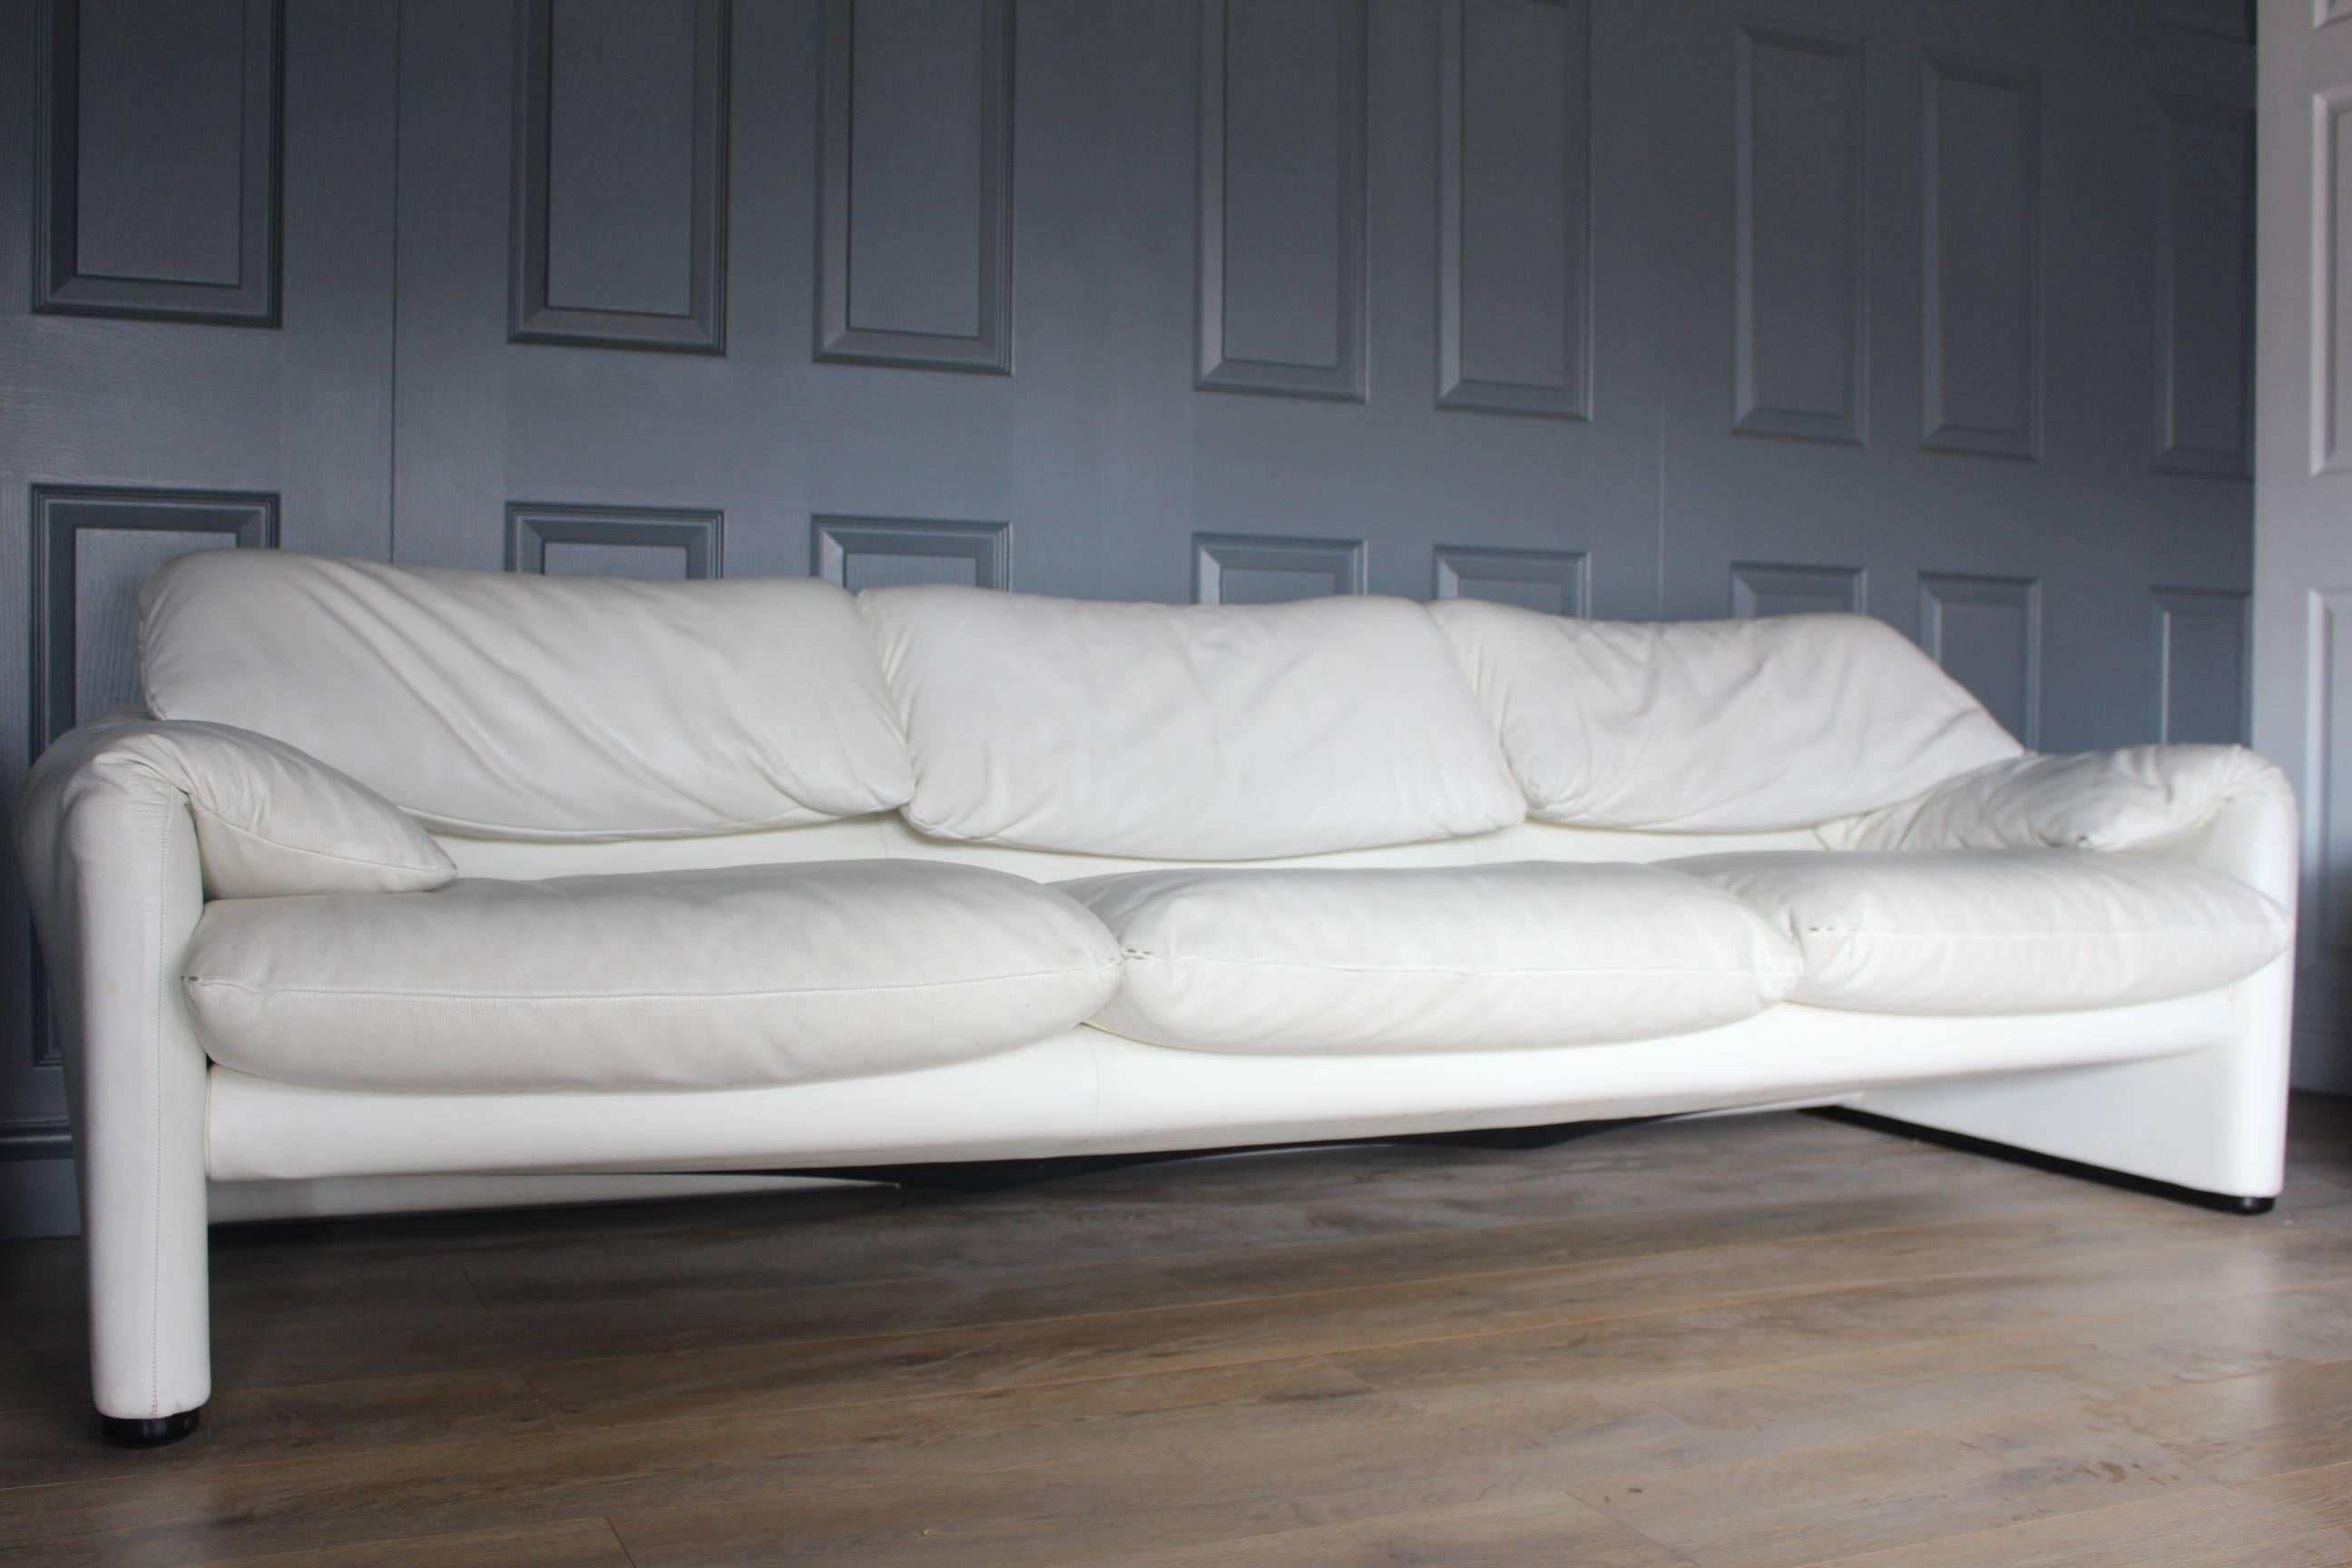 Designer Cassina Maralunga by Vico Magistretti white leather three-seat sofa 
RRP £9072 
great quality piece of furniture from well-known designer 
very good clean condition
well cared for
head mechanism works fine
iconic design

The